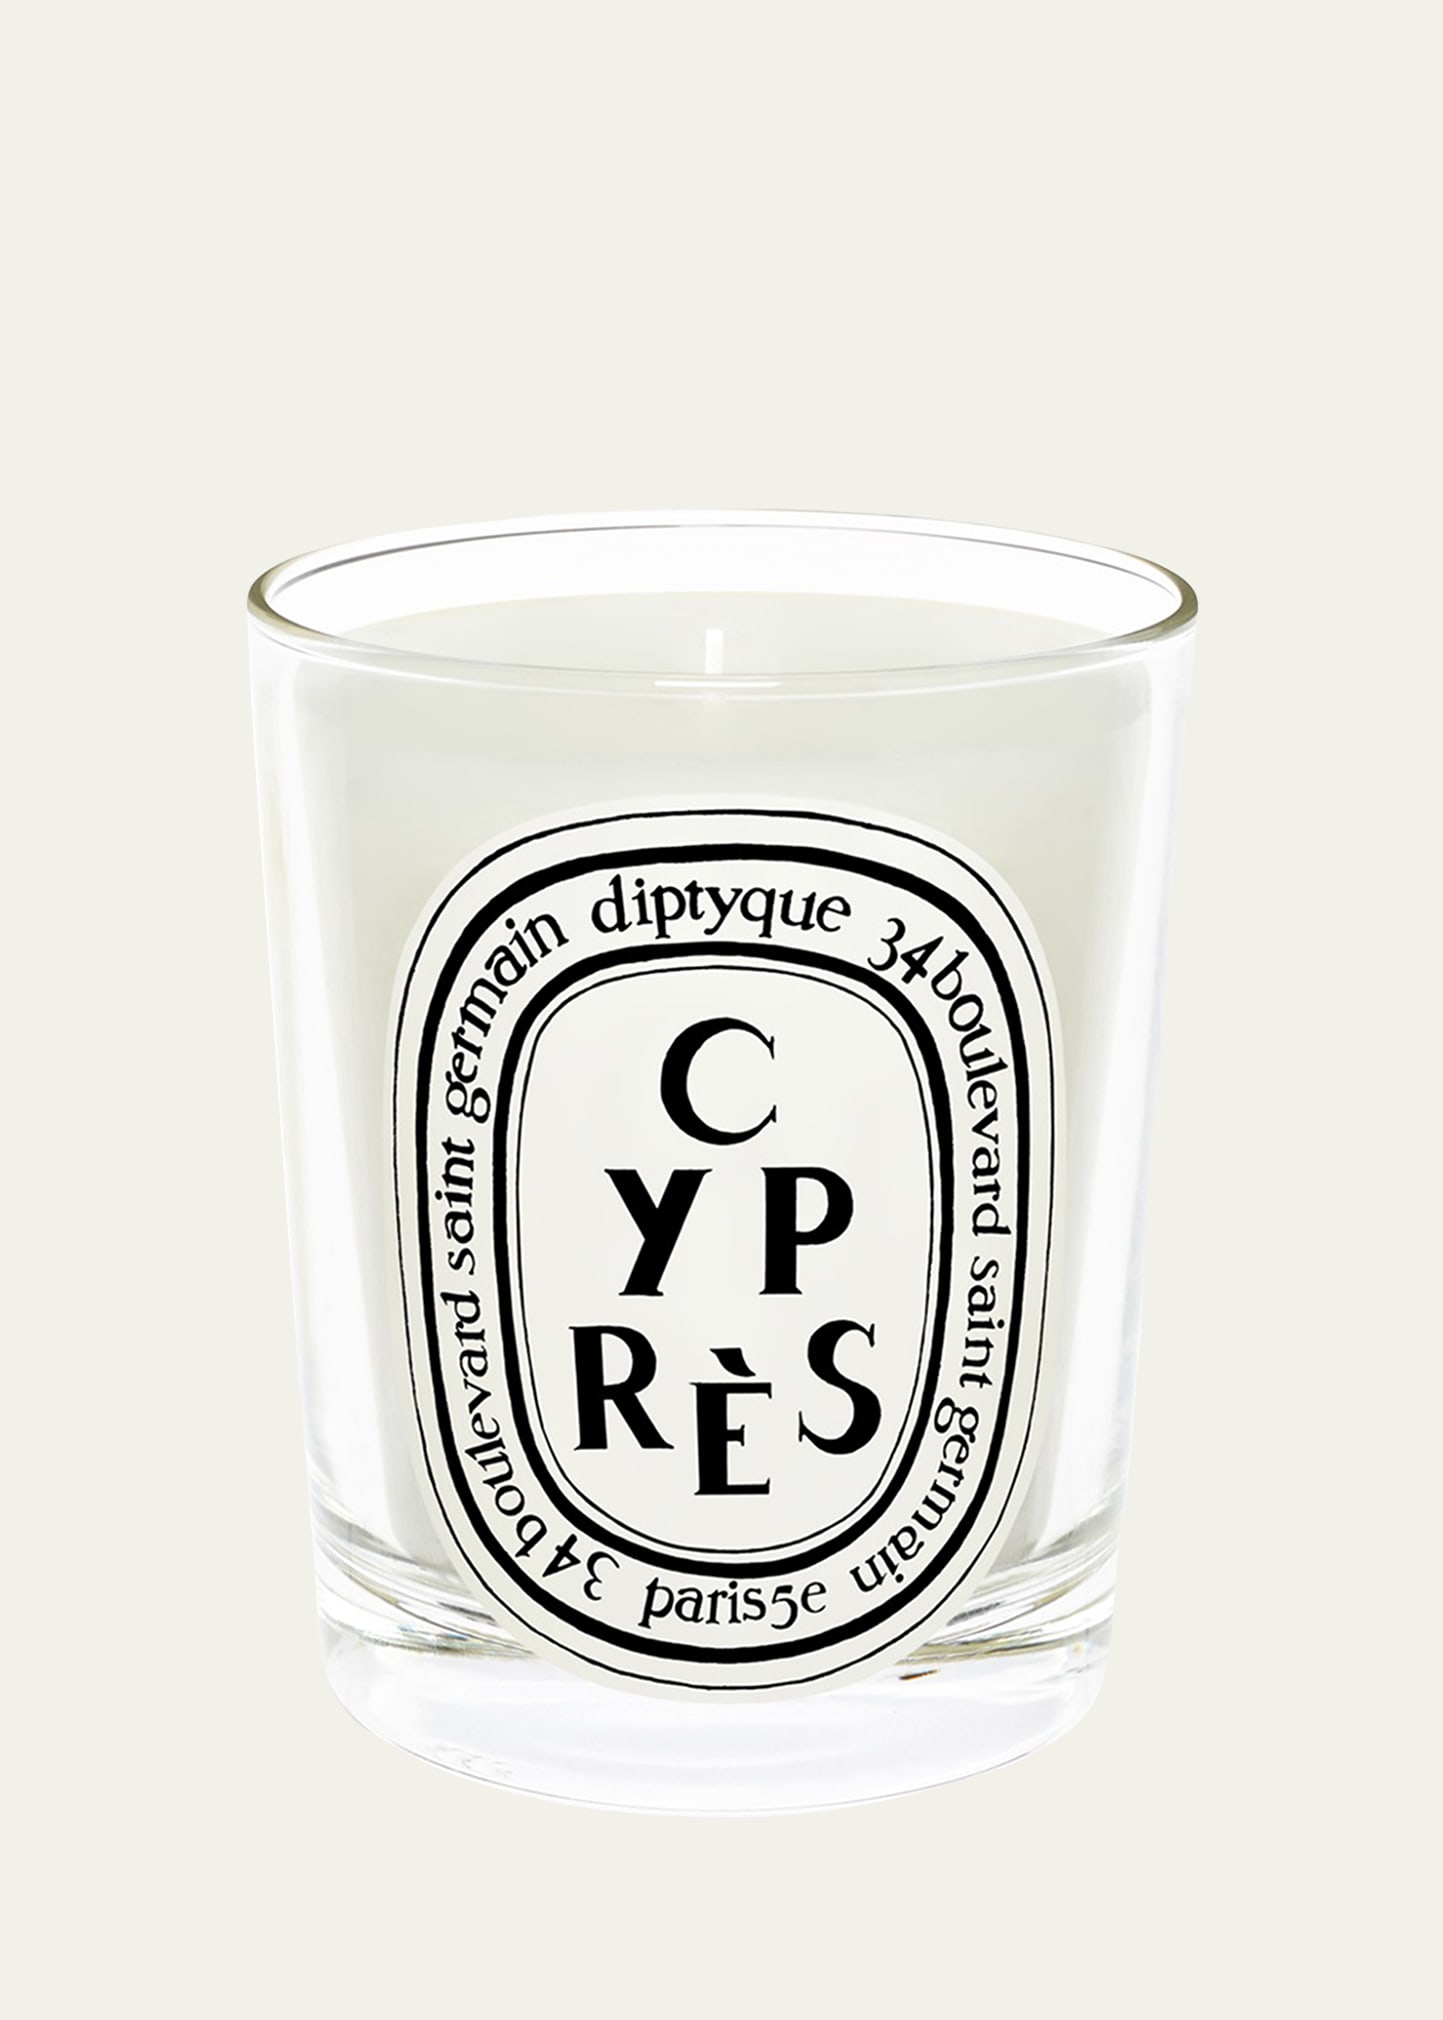 DIPTYQUE Cypres (Cypress) Scented Candle, 6.5 oz.